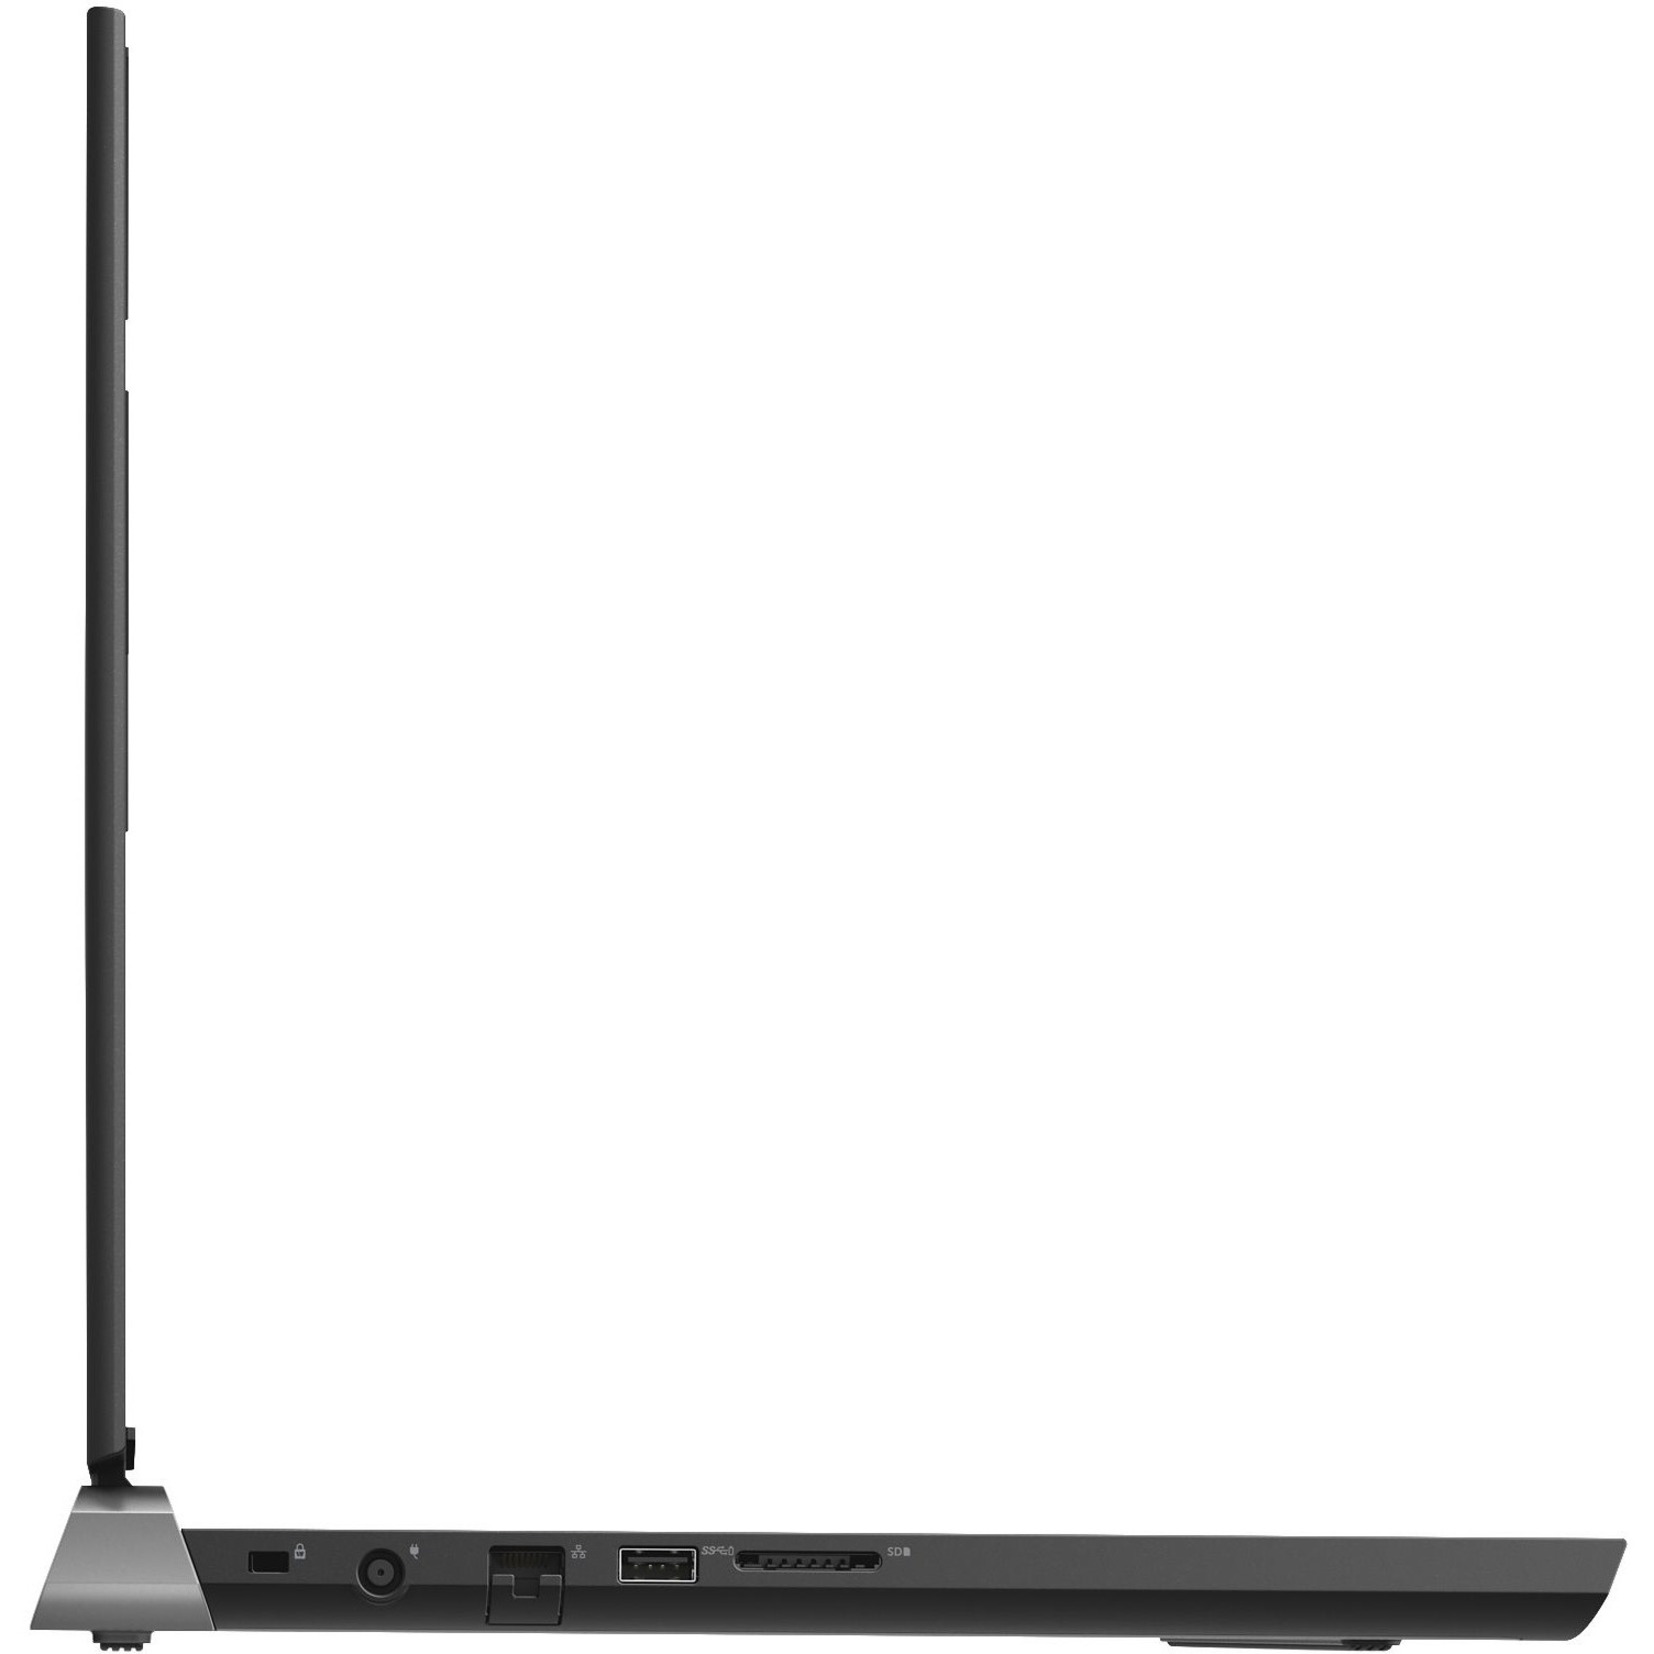 Dell Inspiron 15 7577 15.6 inch Gaming Laptop, Intel Core i5-7300HQ, 8GB Memory, 128GB Solid State Drive + 1TB HDD, NVIDIA® GeForce® GTX 1060 - image 5 of 23